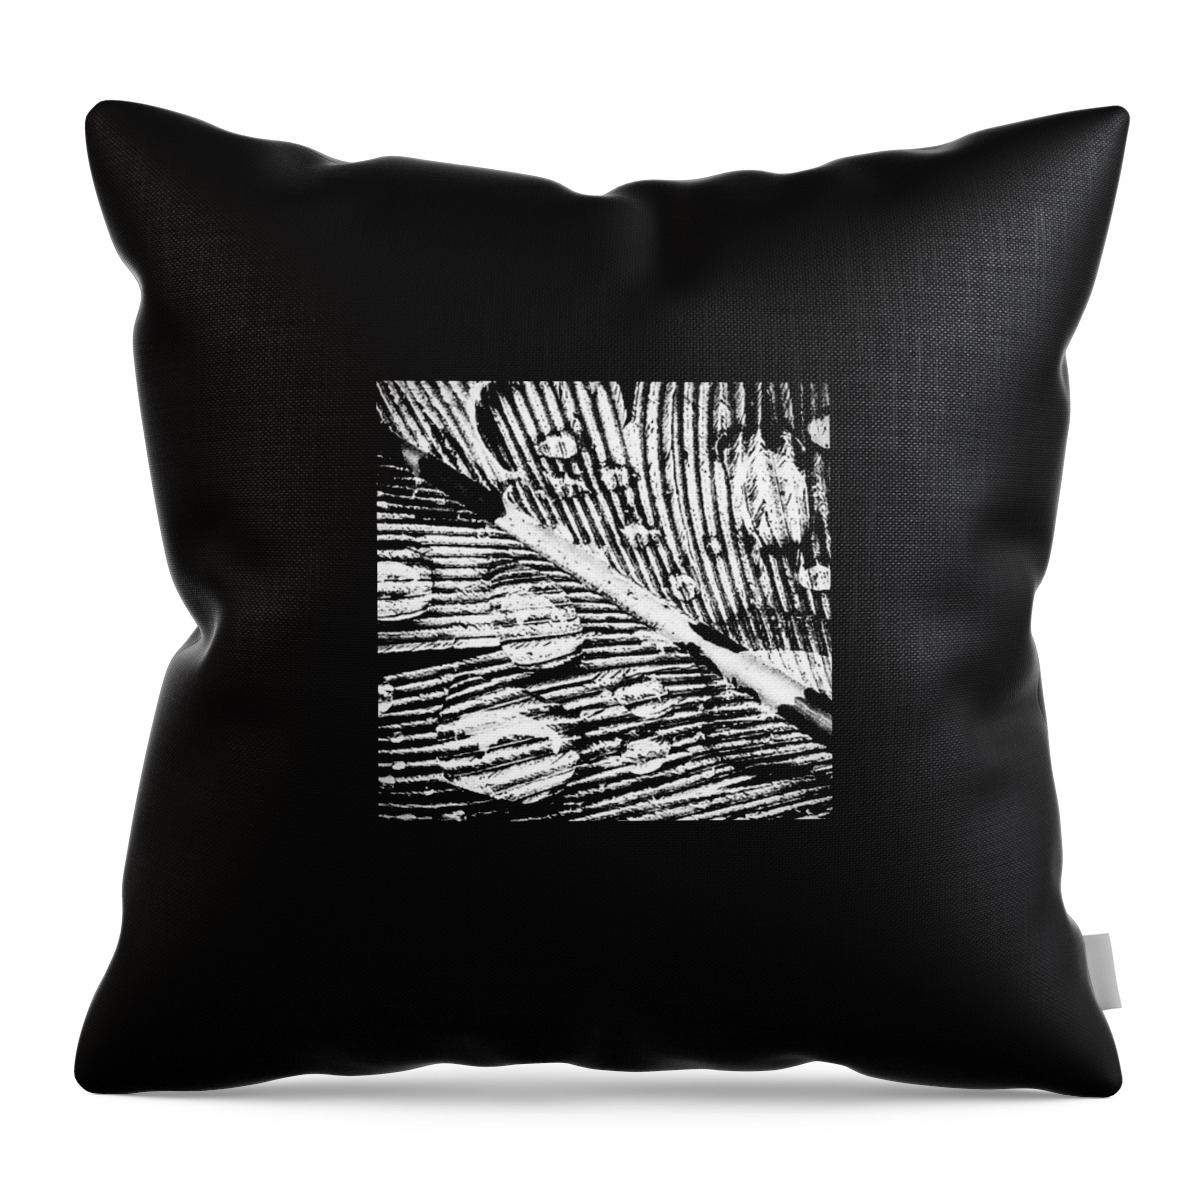 Beautiful Throw Pillow featuring the photograph Feather by Jason Roust